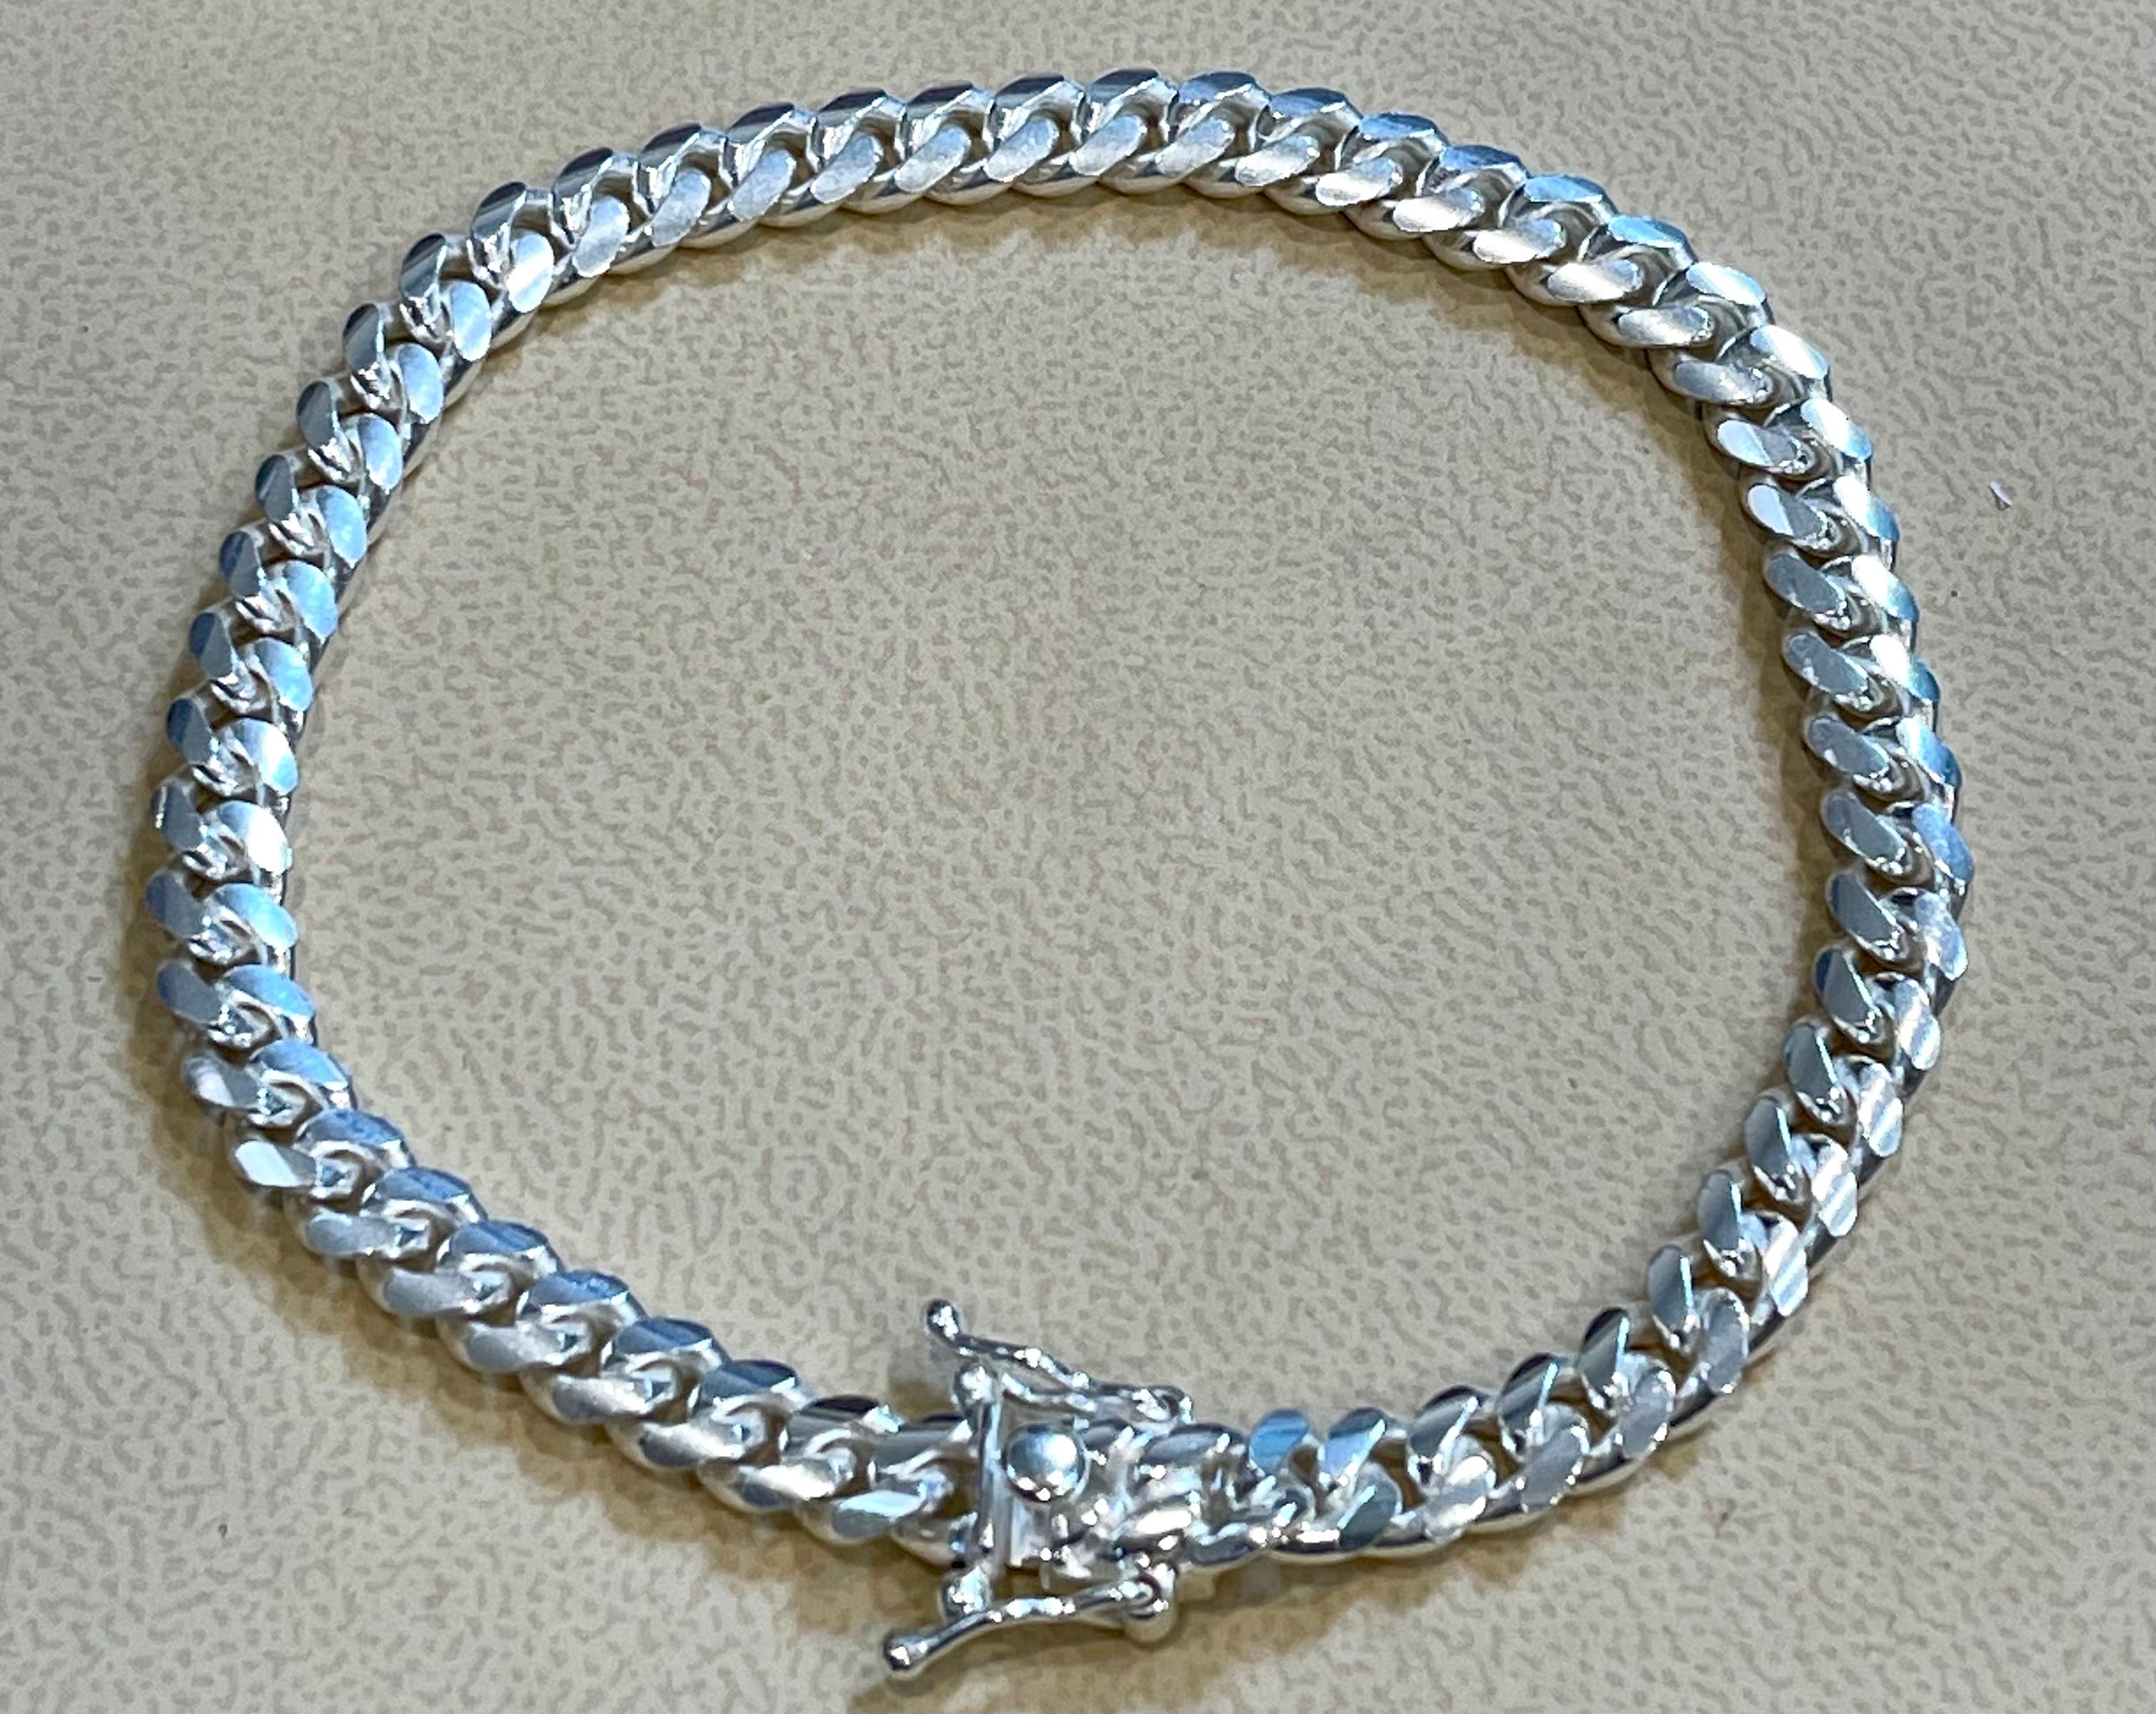 long 8.5 inch , unisex
Pure sterling silver which will not tarnish over time.
8.5 inch long
Cuban style links
Weight of the bracelet is 22.5 grams
I guaranteed you will be very happy .
Super fashionable and amazing bling.
Great for Birthday or